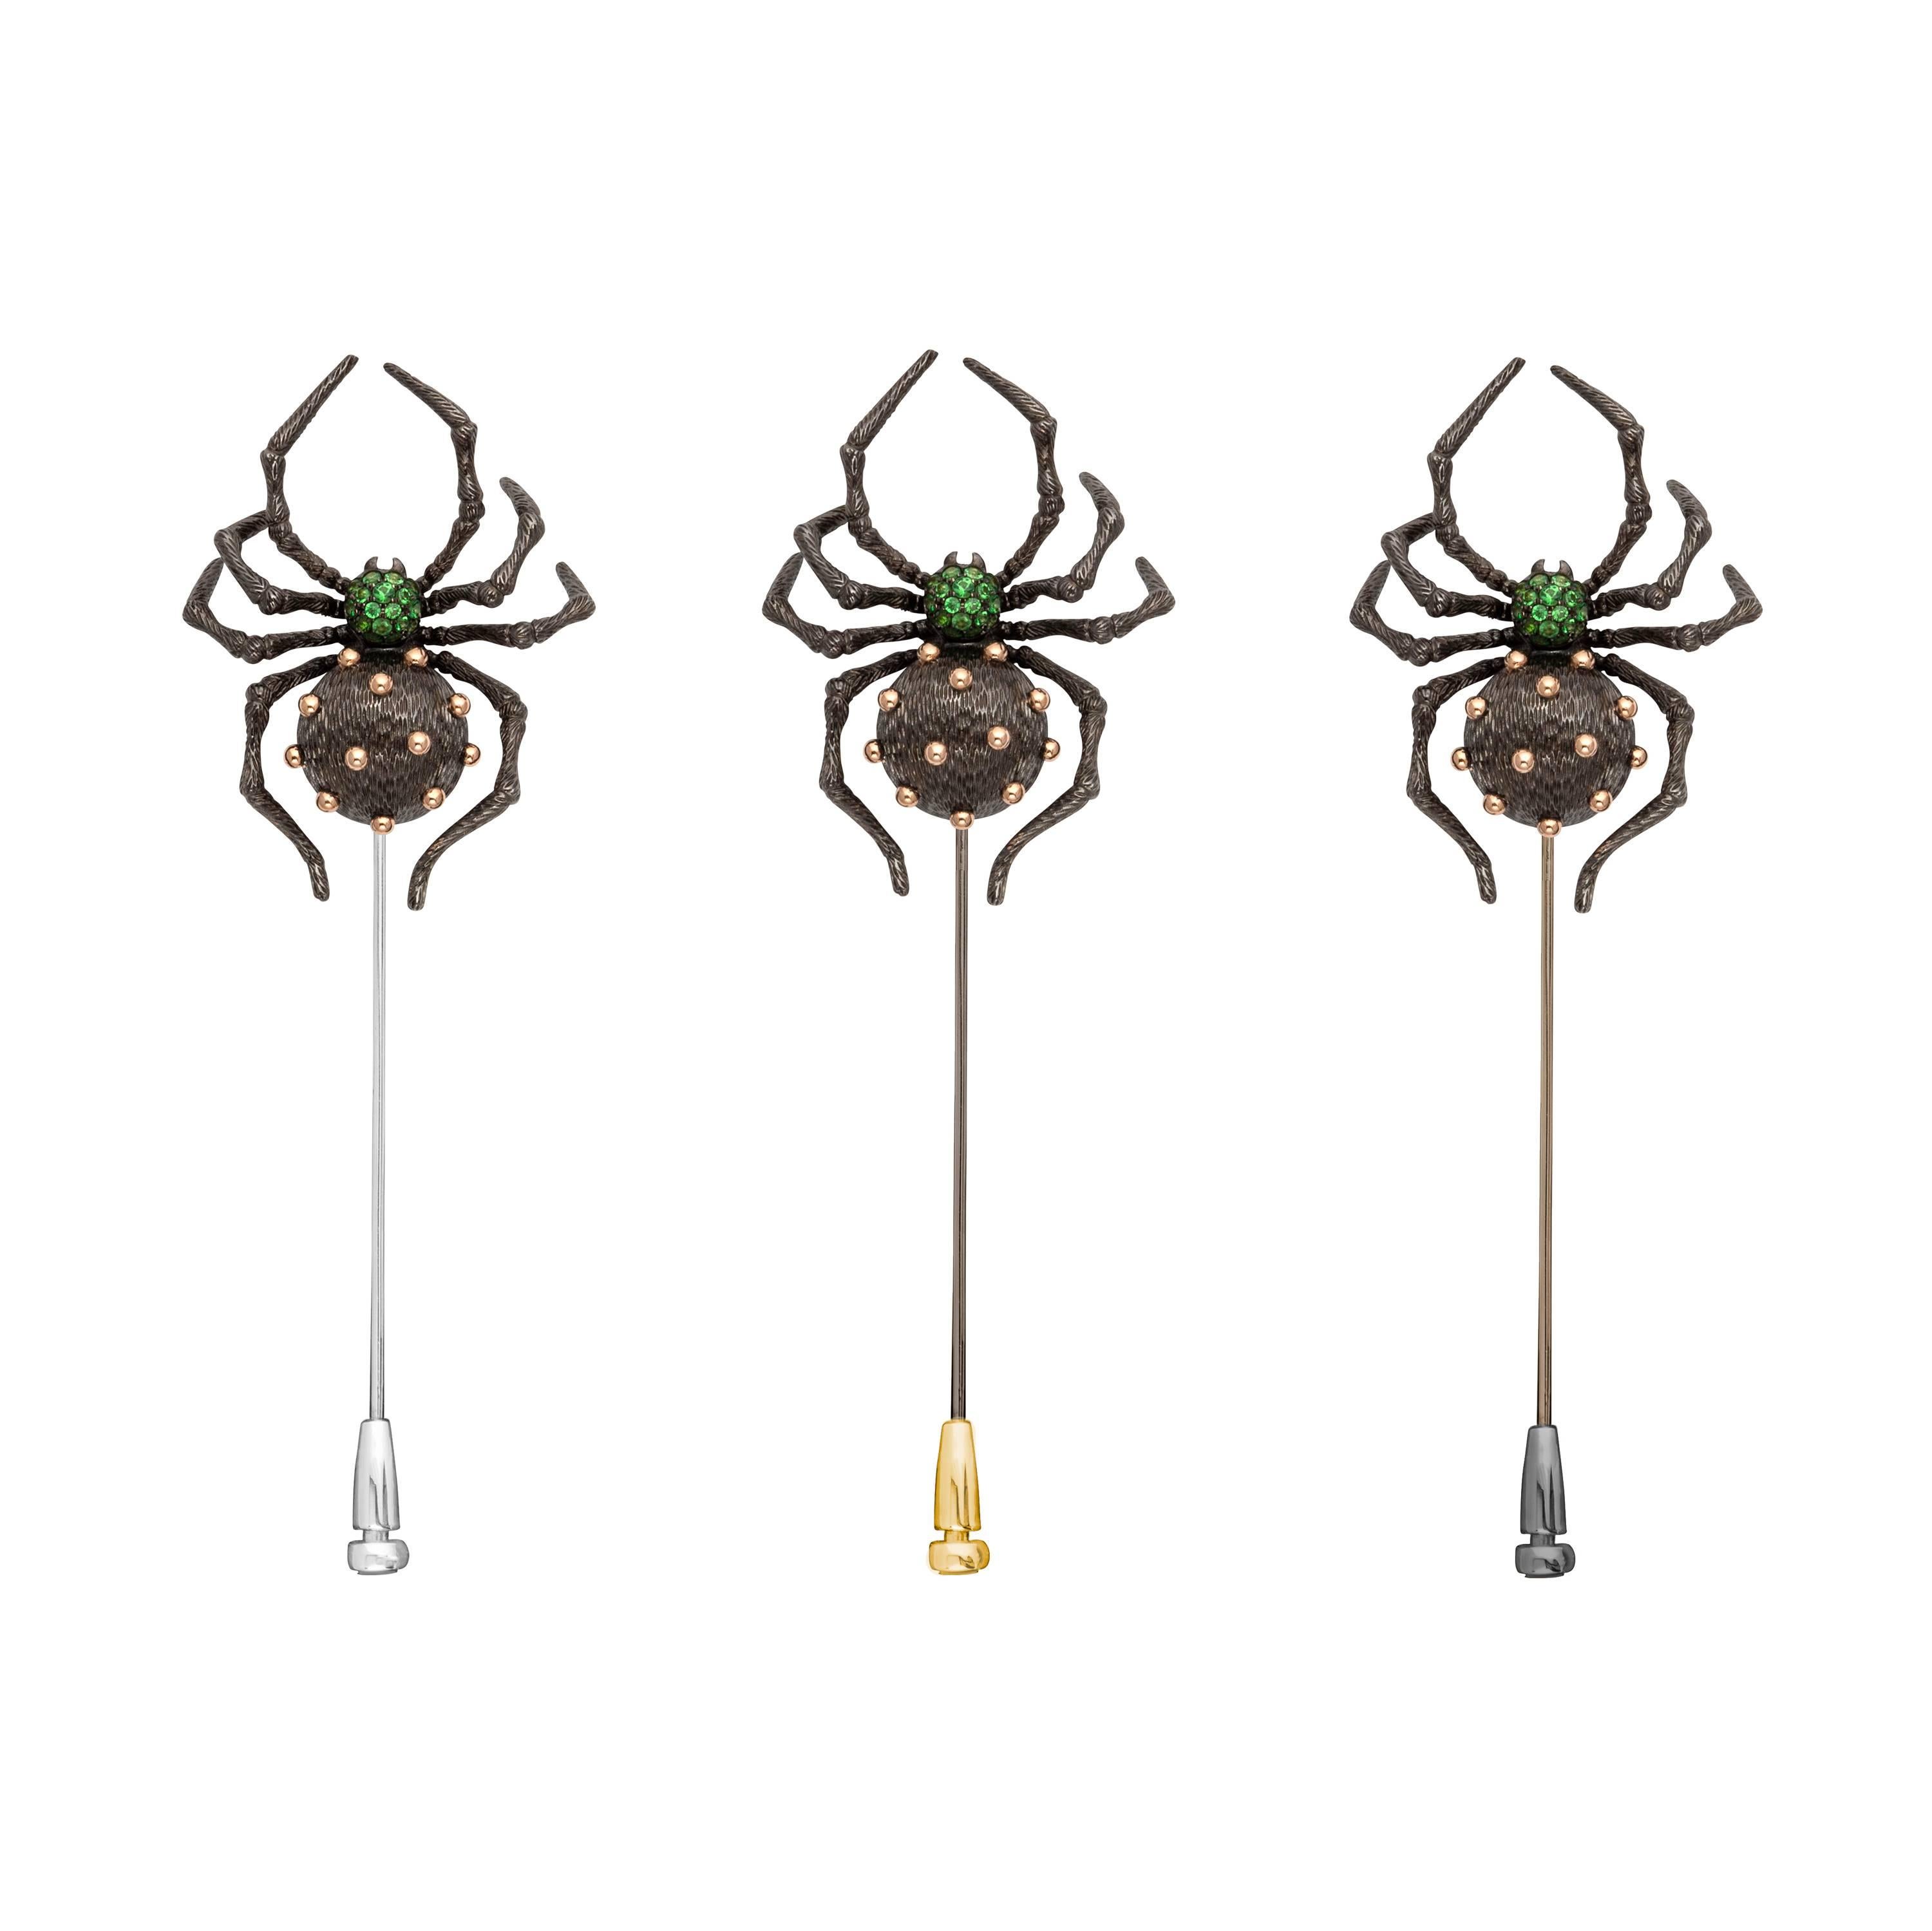 18 Karat Black Gold and Yellow Gold Spider Brooch with Tsavorites In New Condition For Sale In Hong Kong, APAC - East Asia